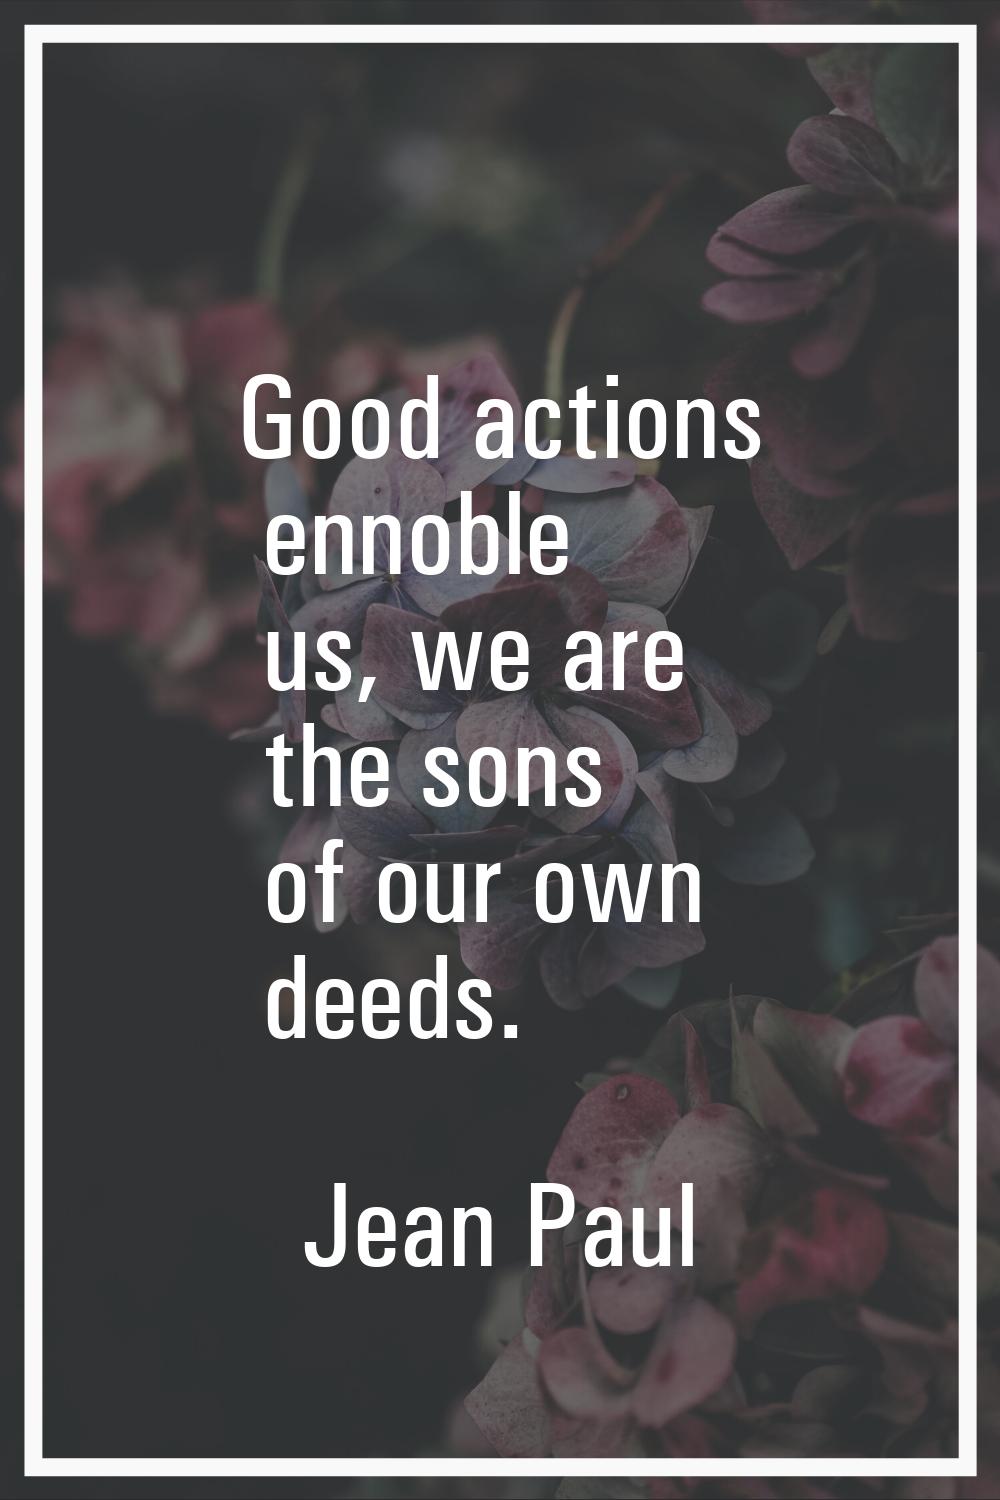 Good actions ennoble us, we are the sons of our own deeds.